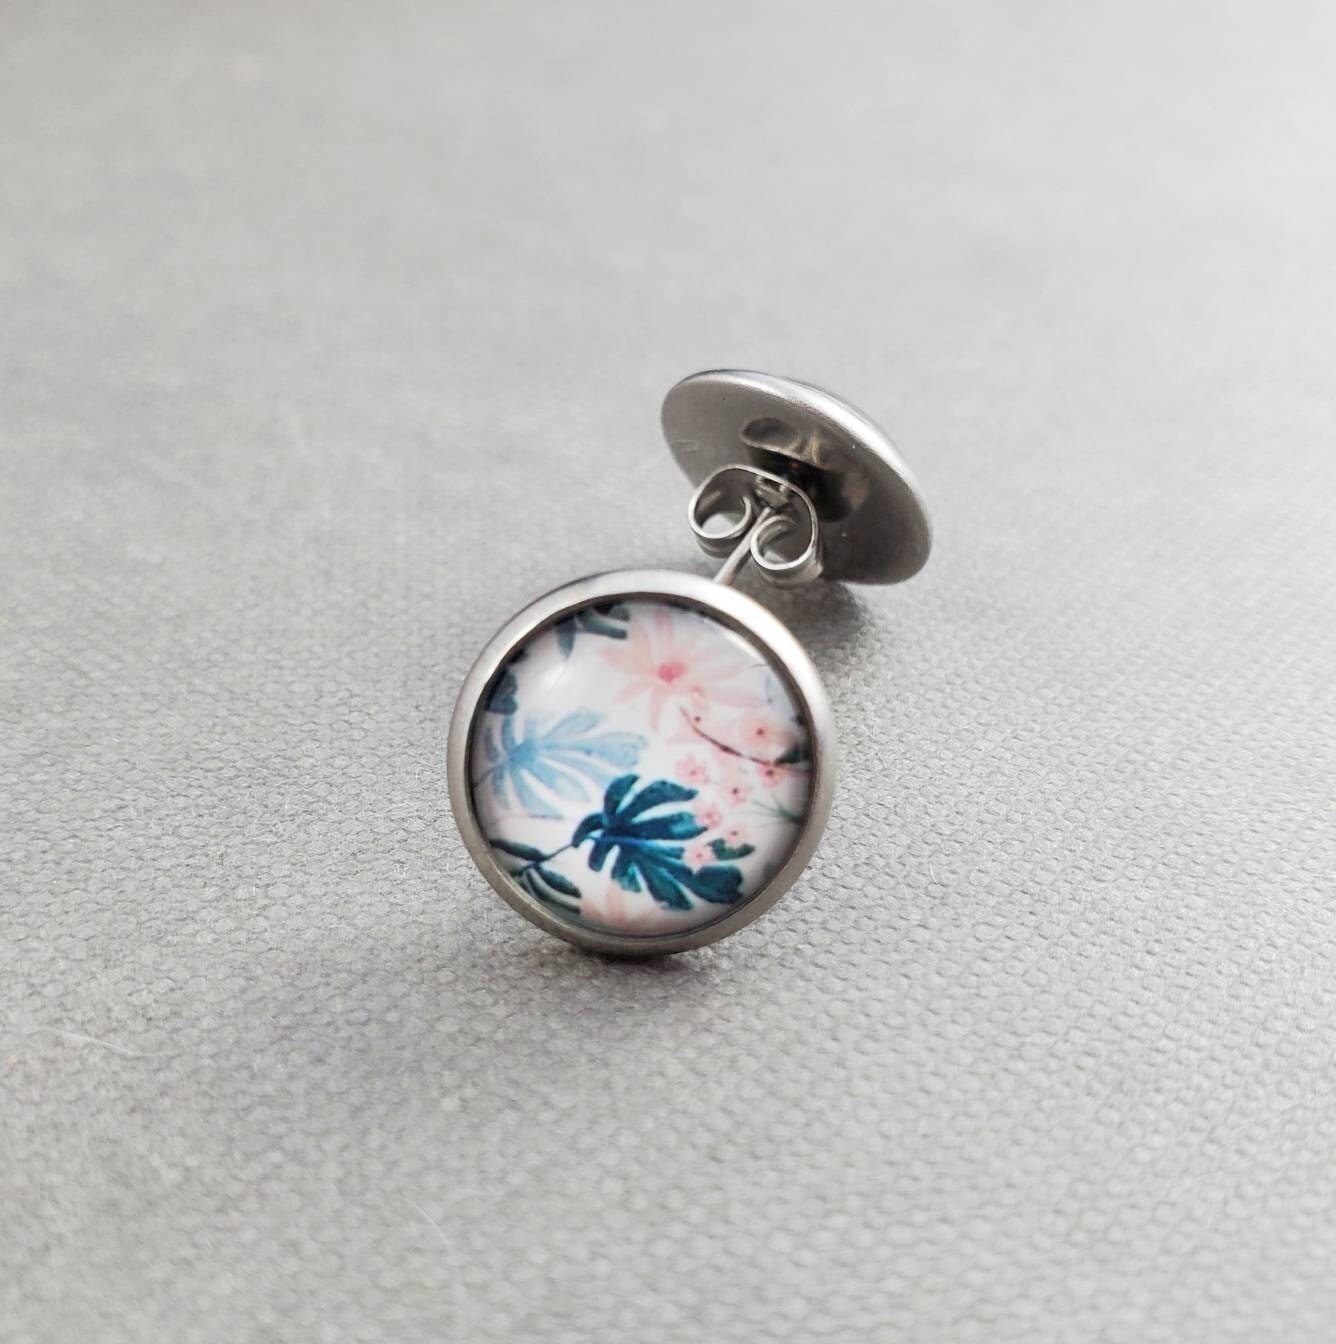 Tropical Floral Stud Earrings, Hypoallergenic Stainless Steel Posts, Glass Cabochon Jewelry. Gift for Her